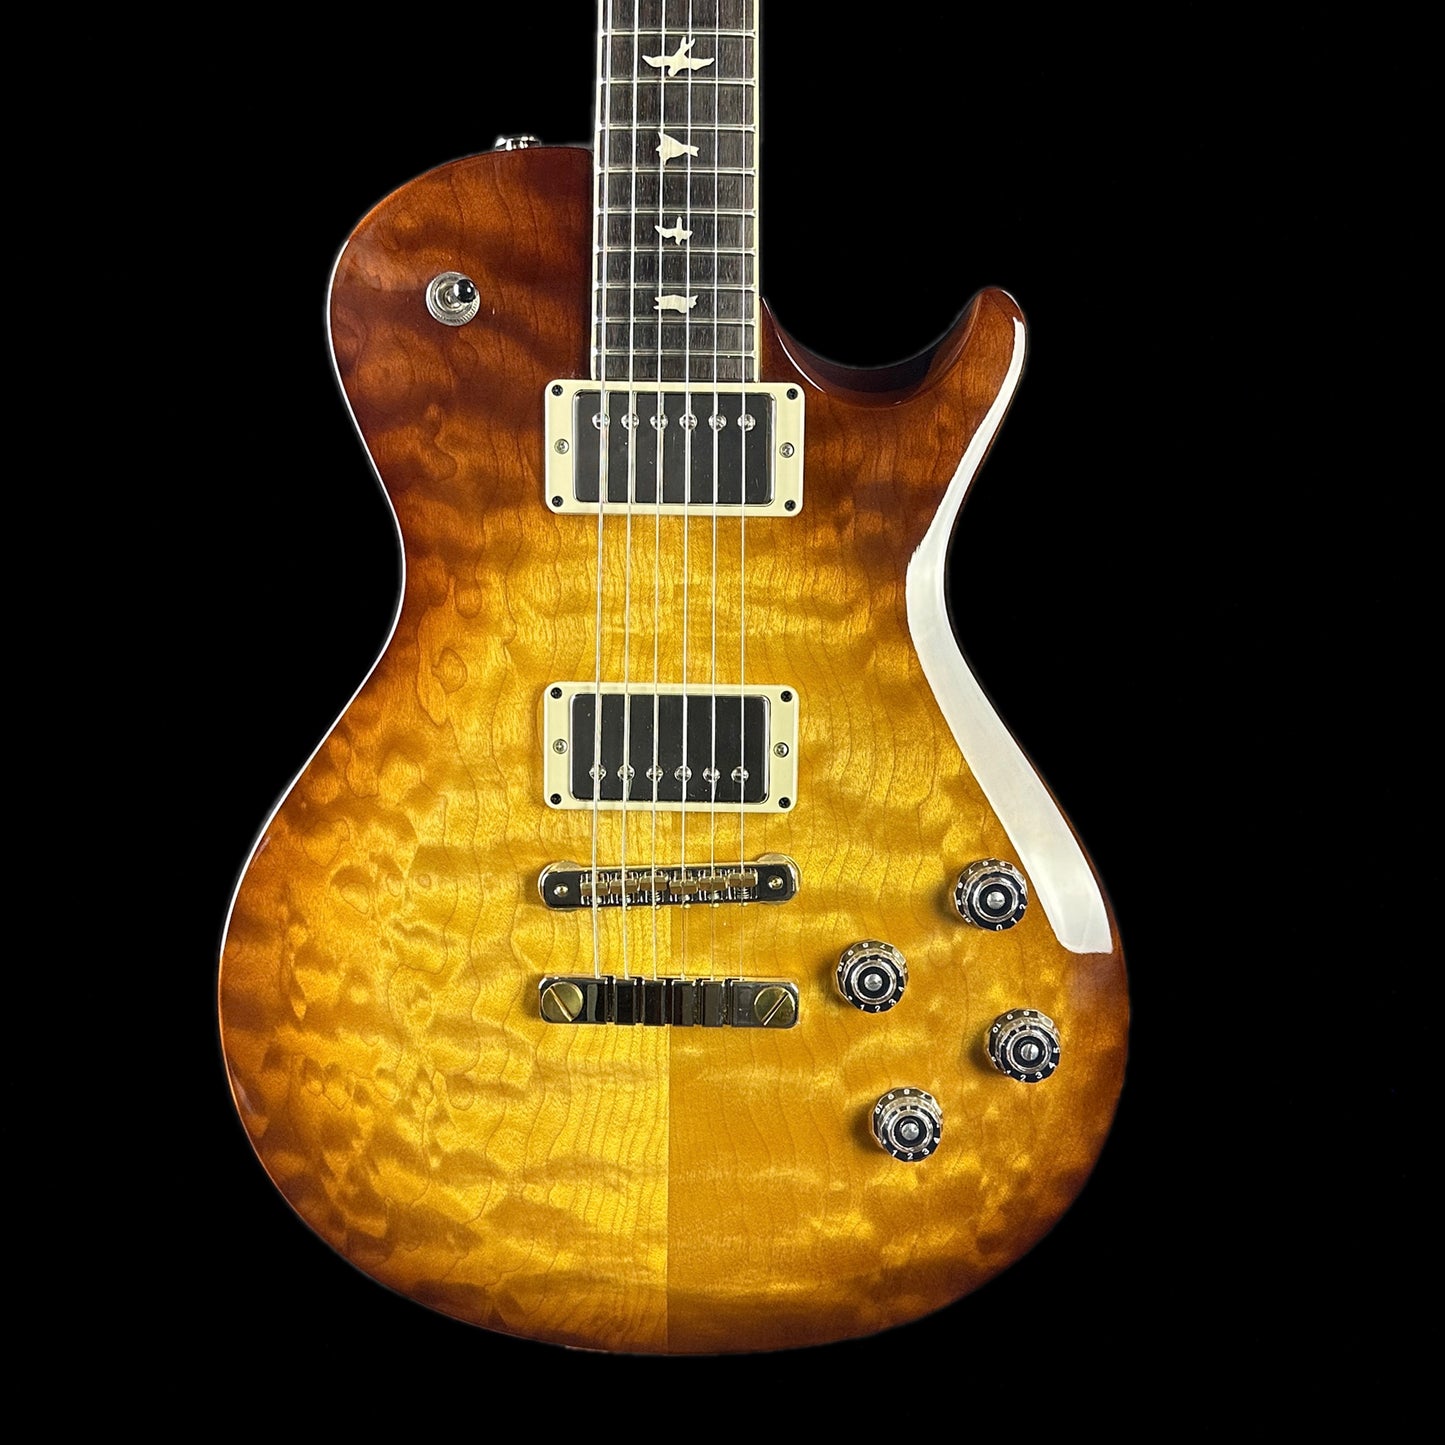 Front of body of PRS Paul Reed Smith S2 McCarty 594 Singlecut Quilt Livingston Lemondrop.